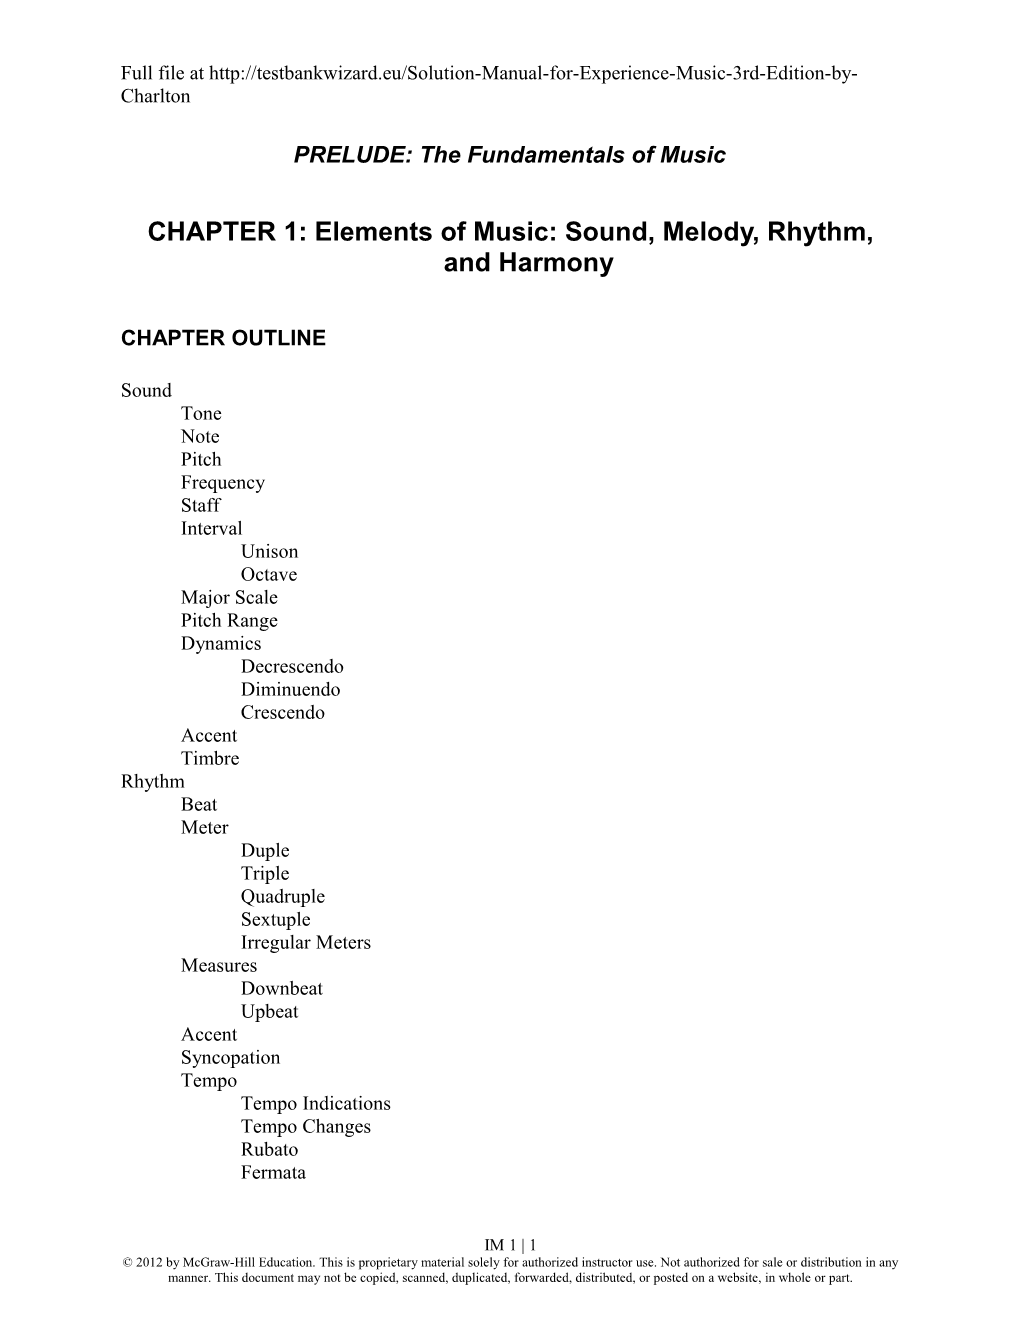 CHAPTER I: Elements of Music: Sound, Melody, Rhythm, and Harmony